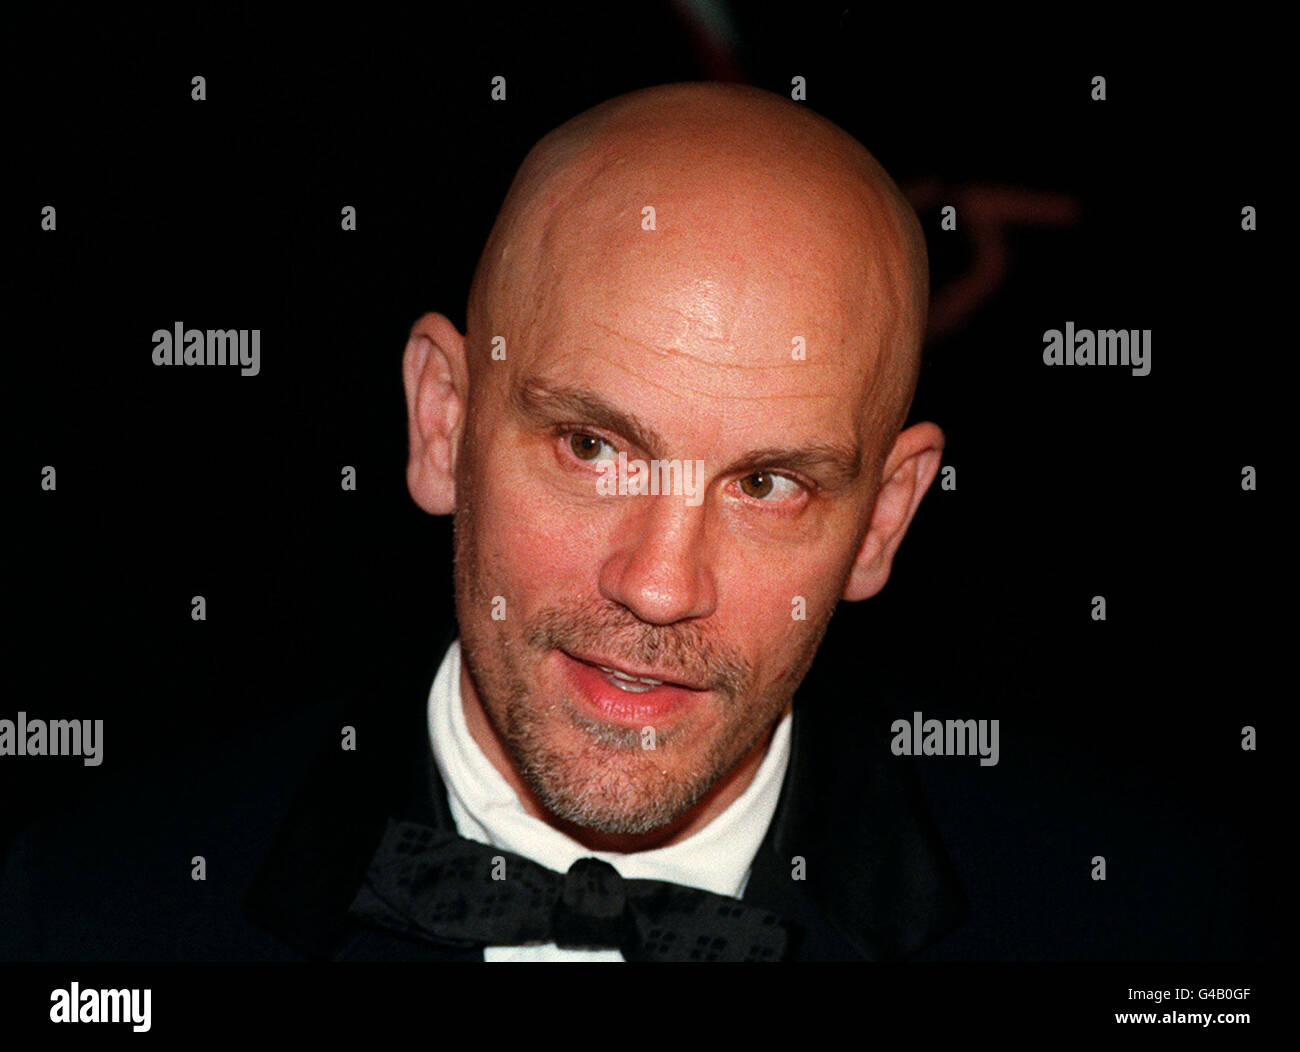 PA NEWS PHOTO 19/3/98 John Malkovich at the Royal Premier of 'The Man in the Iron Mask' at the Odeon Leicester Square, London this evening (Thursday). Photo by Peter Jordan/PA Stock Photo